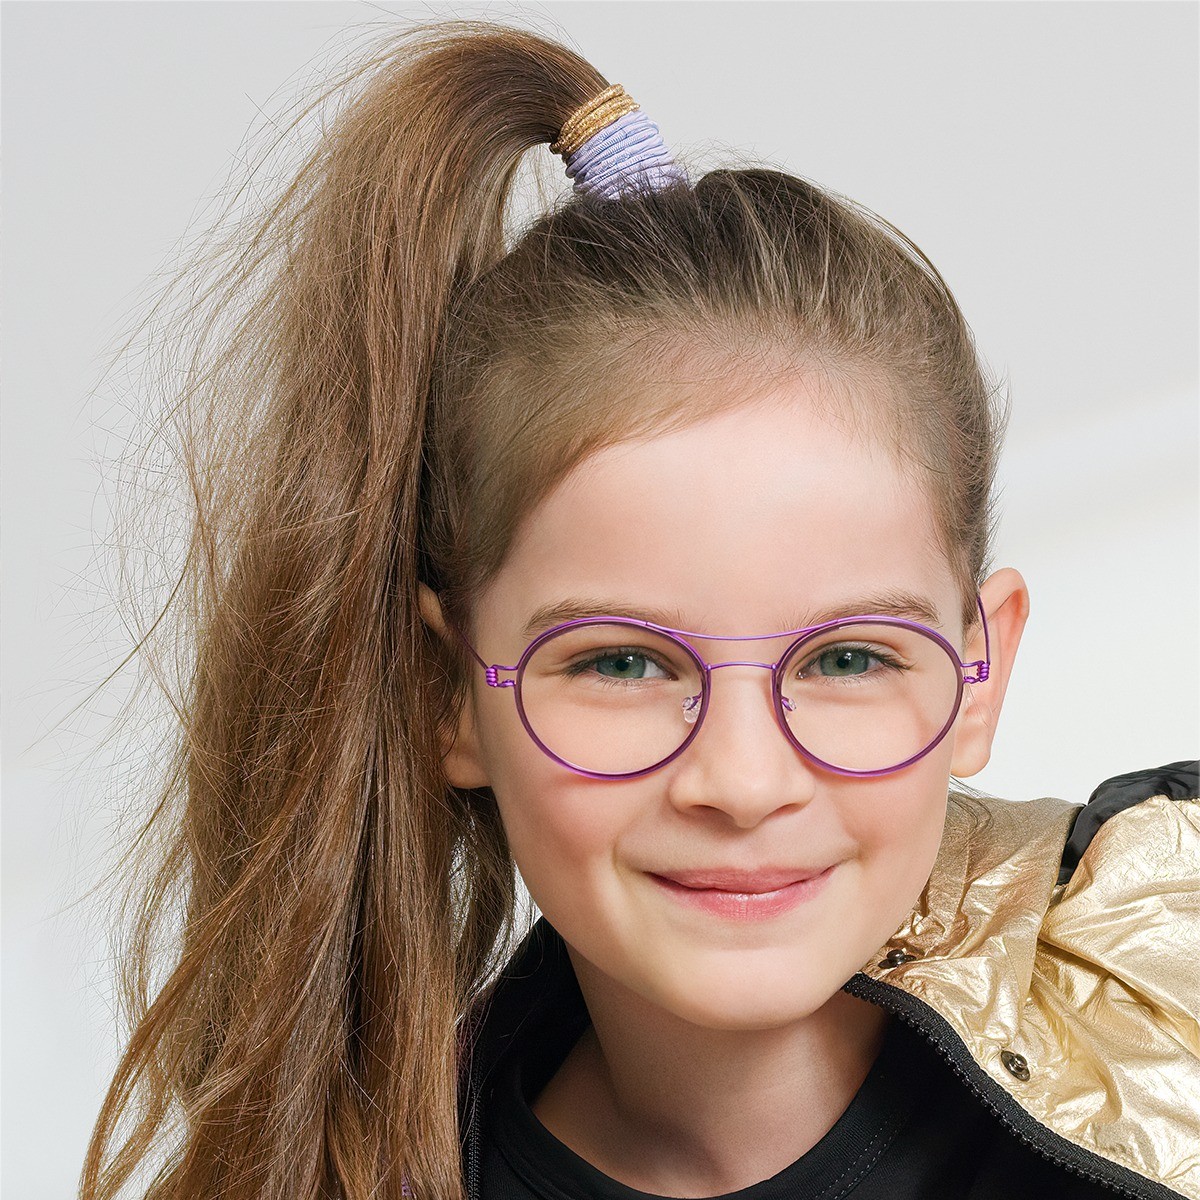 Dick Story Optical has frames for adults, teens and kids! Bring the entire family in to try on frames from premier and exclusive brands! Fashion for the whole family at DickStoryOptical.com

#ShopLocalOKC #OKCfashion #okceyewear #oklahomacity #okcfamily